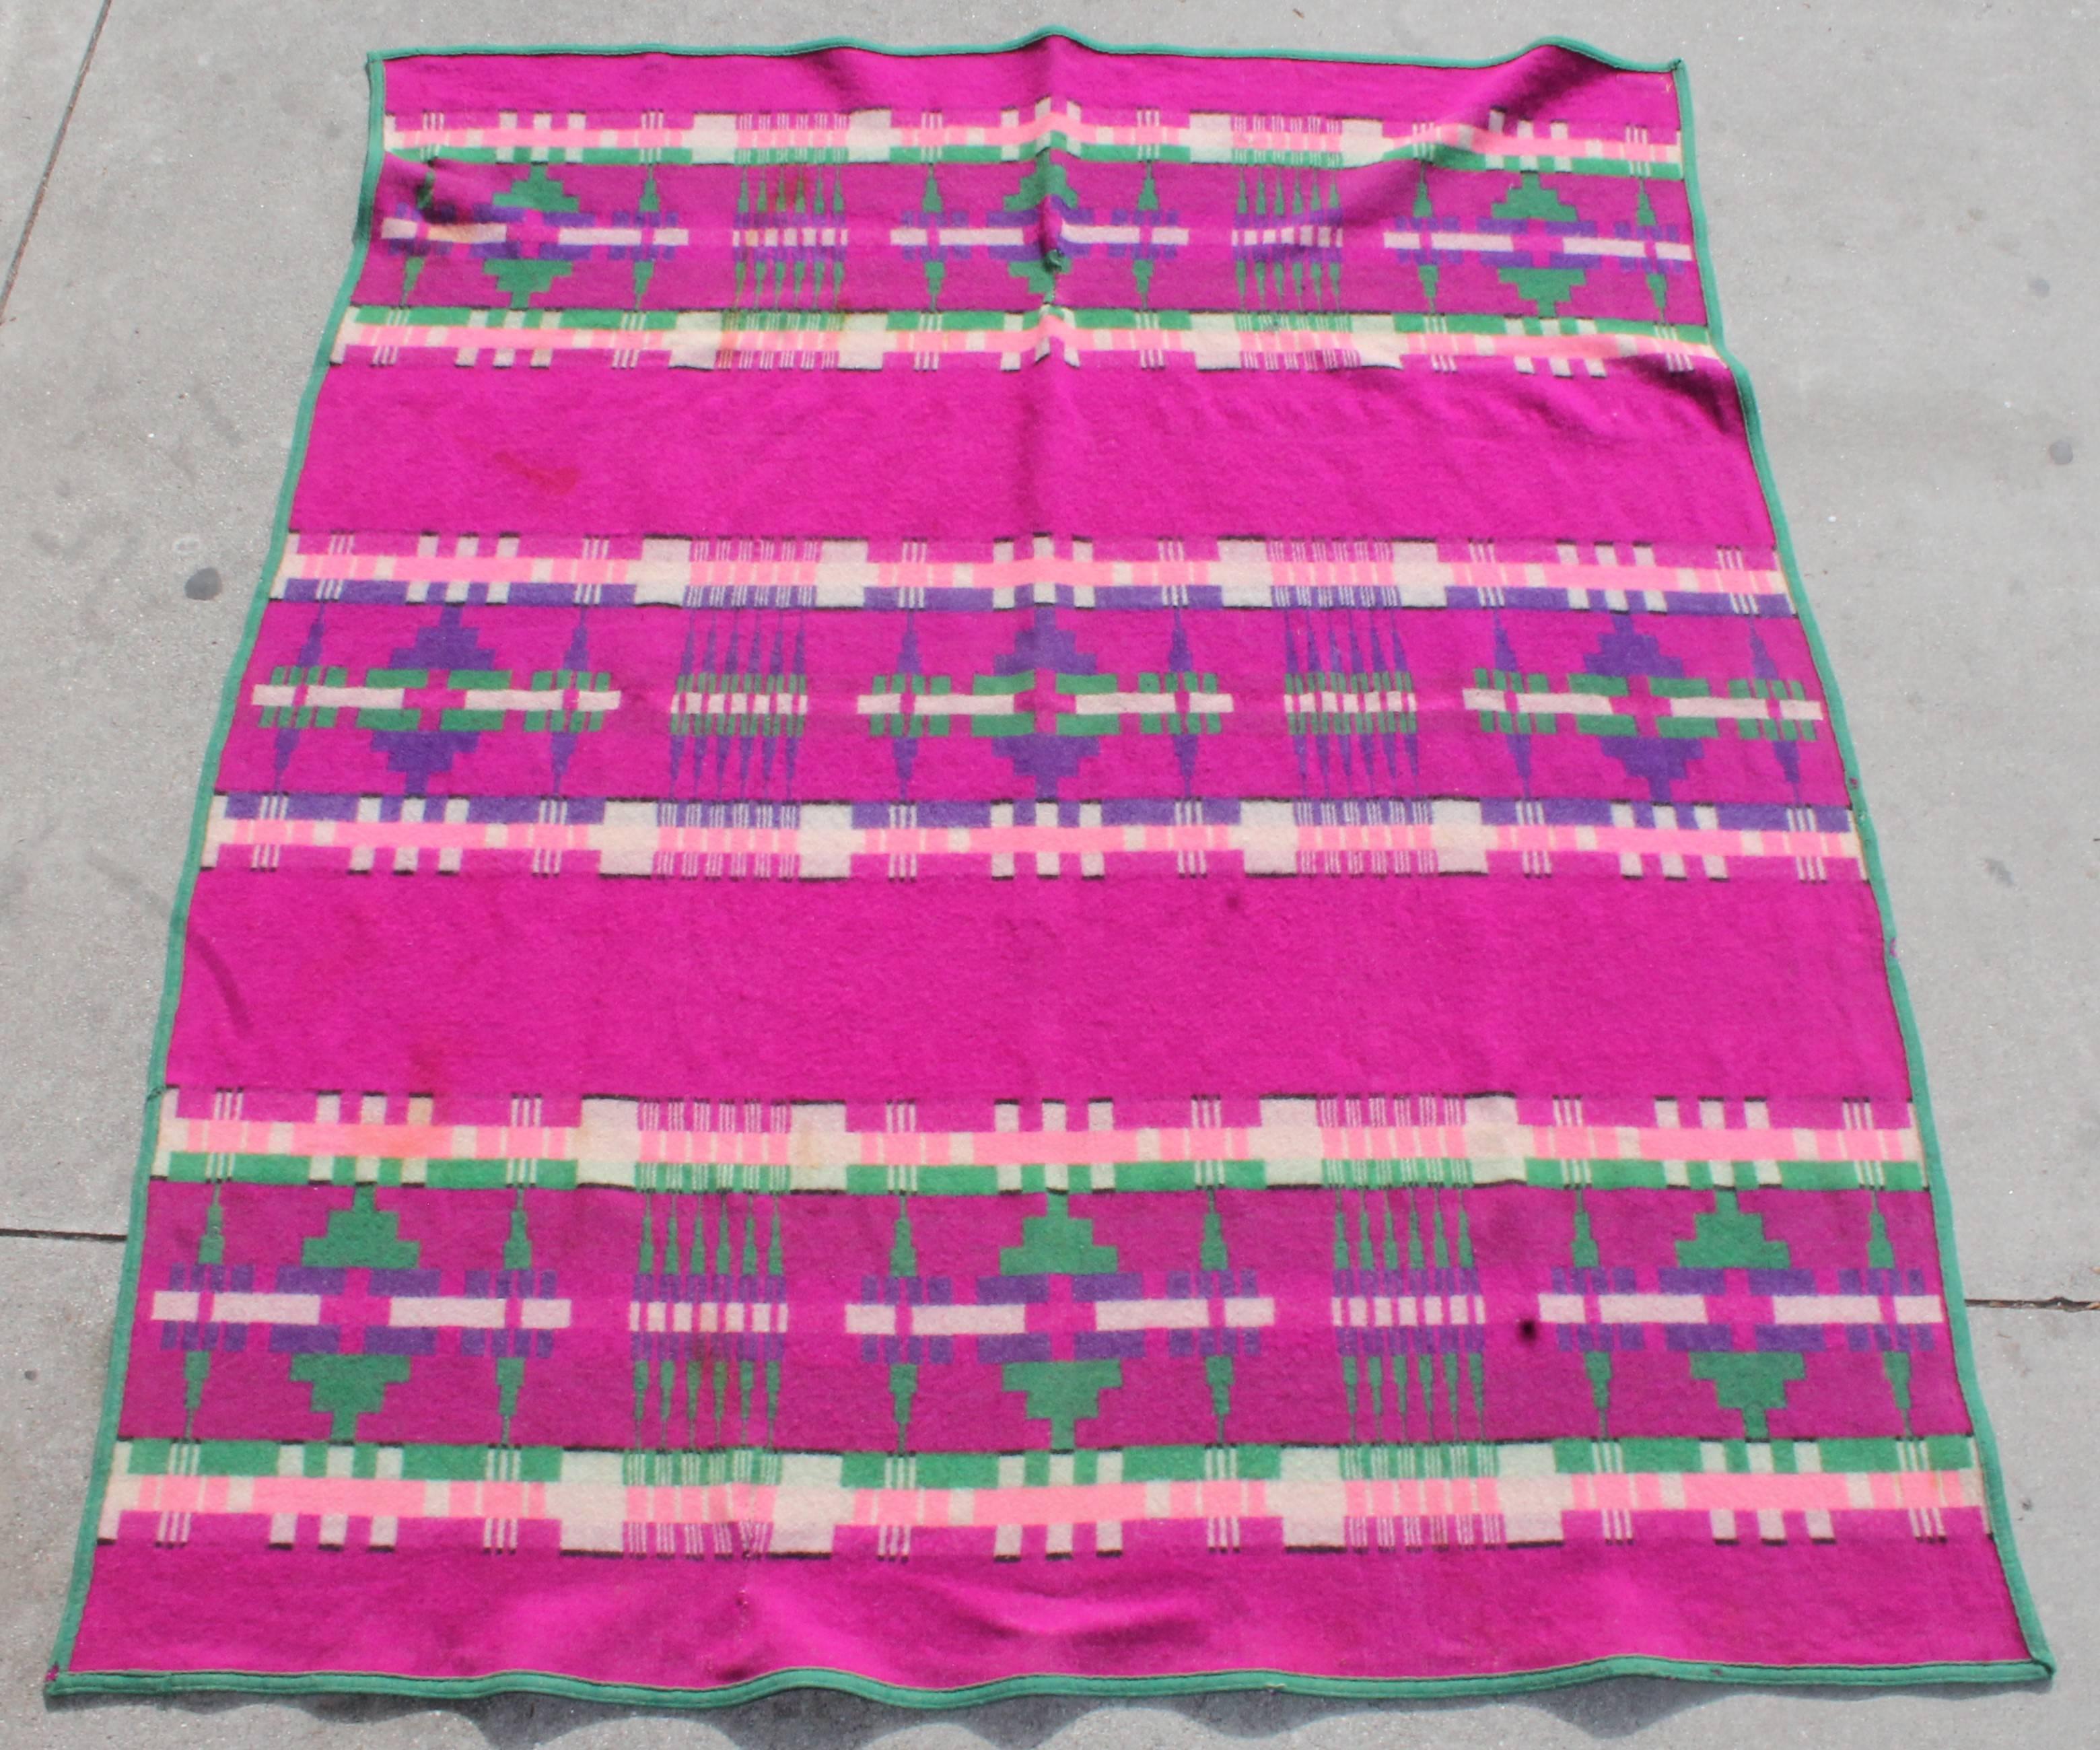 1909 Cayuse Pendleton blanket with vibrant rare colors. This blanket has wear consistent with age and use. There are two minor old repairs to the blanket. The label on this Pendleton is in amazing condition and is the original label.